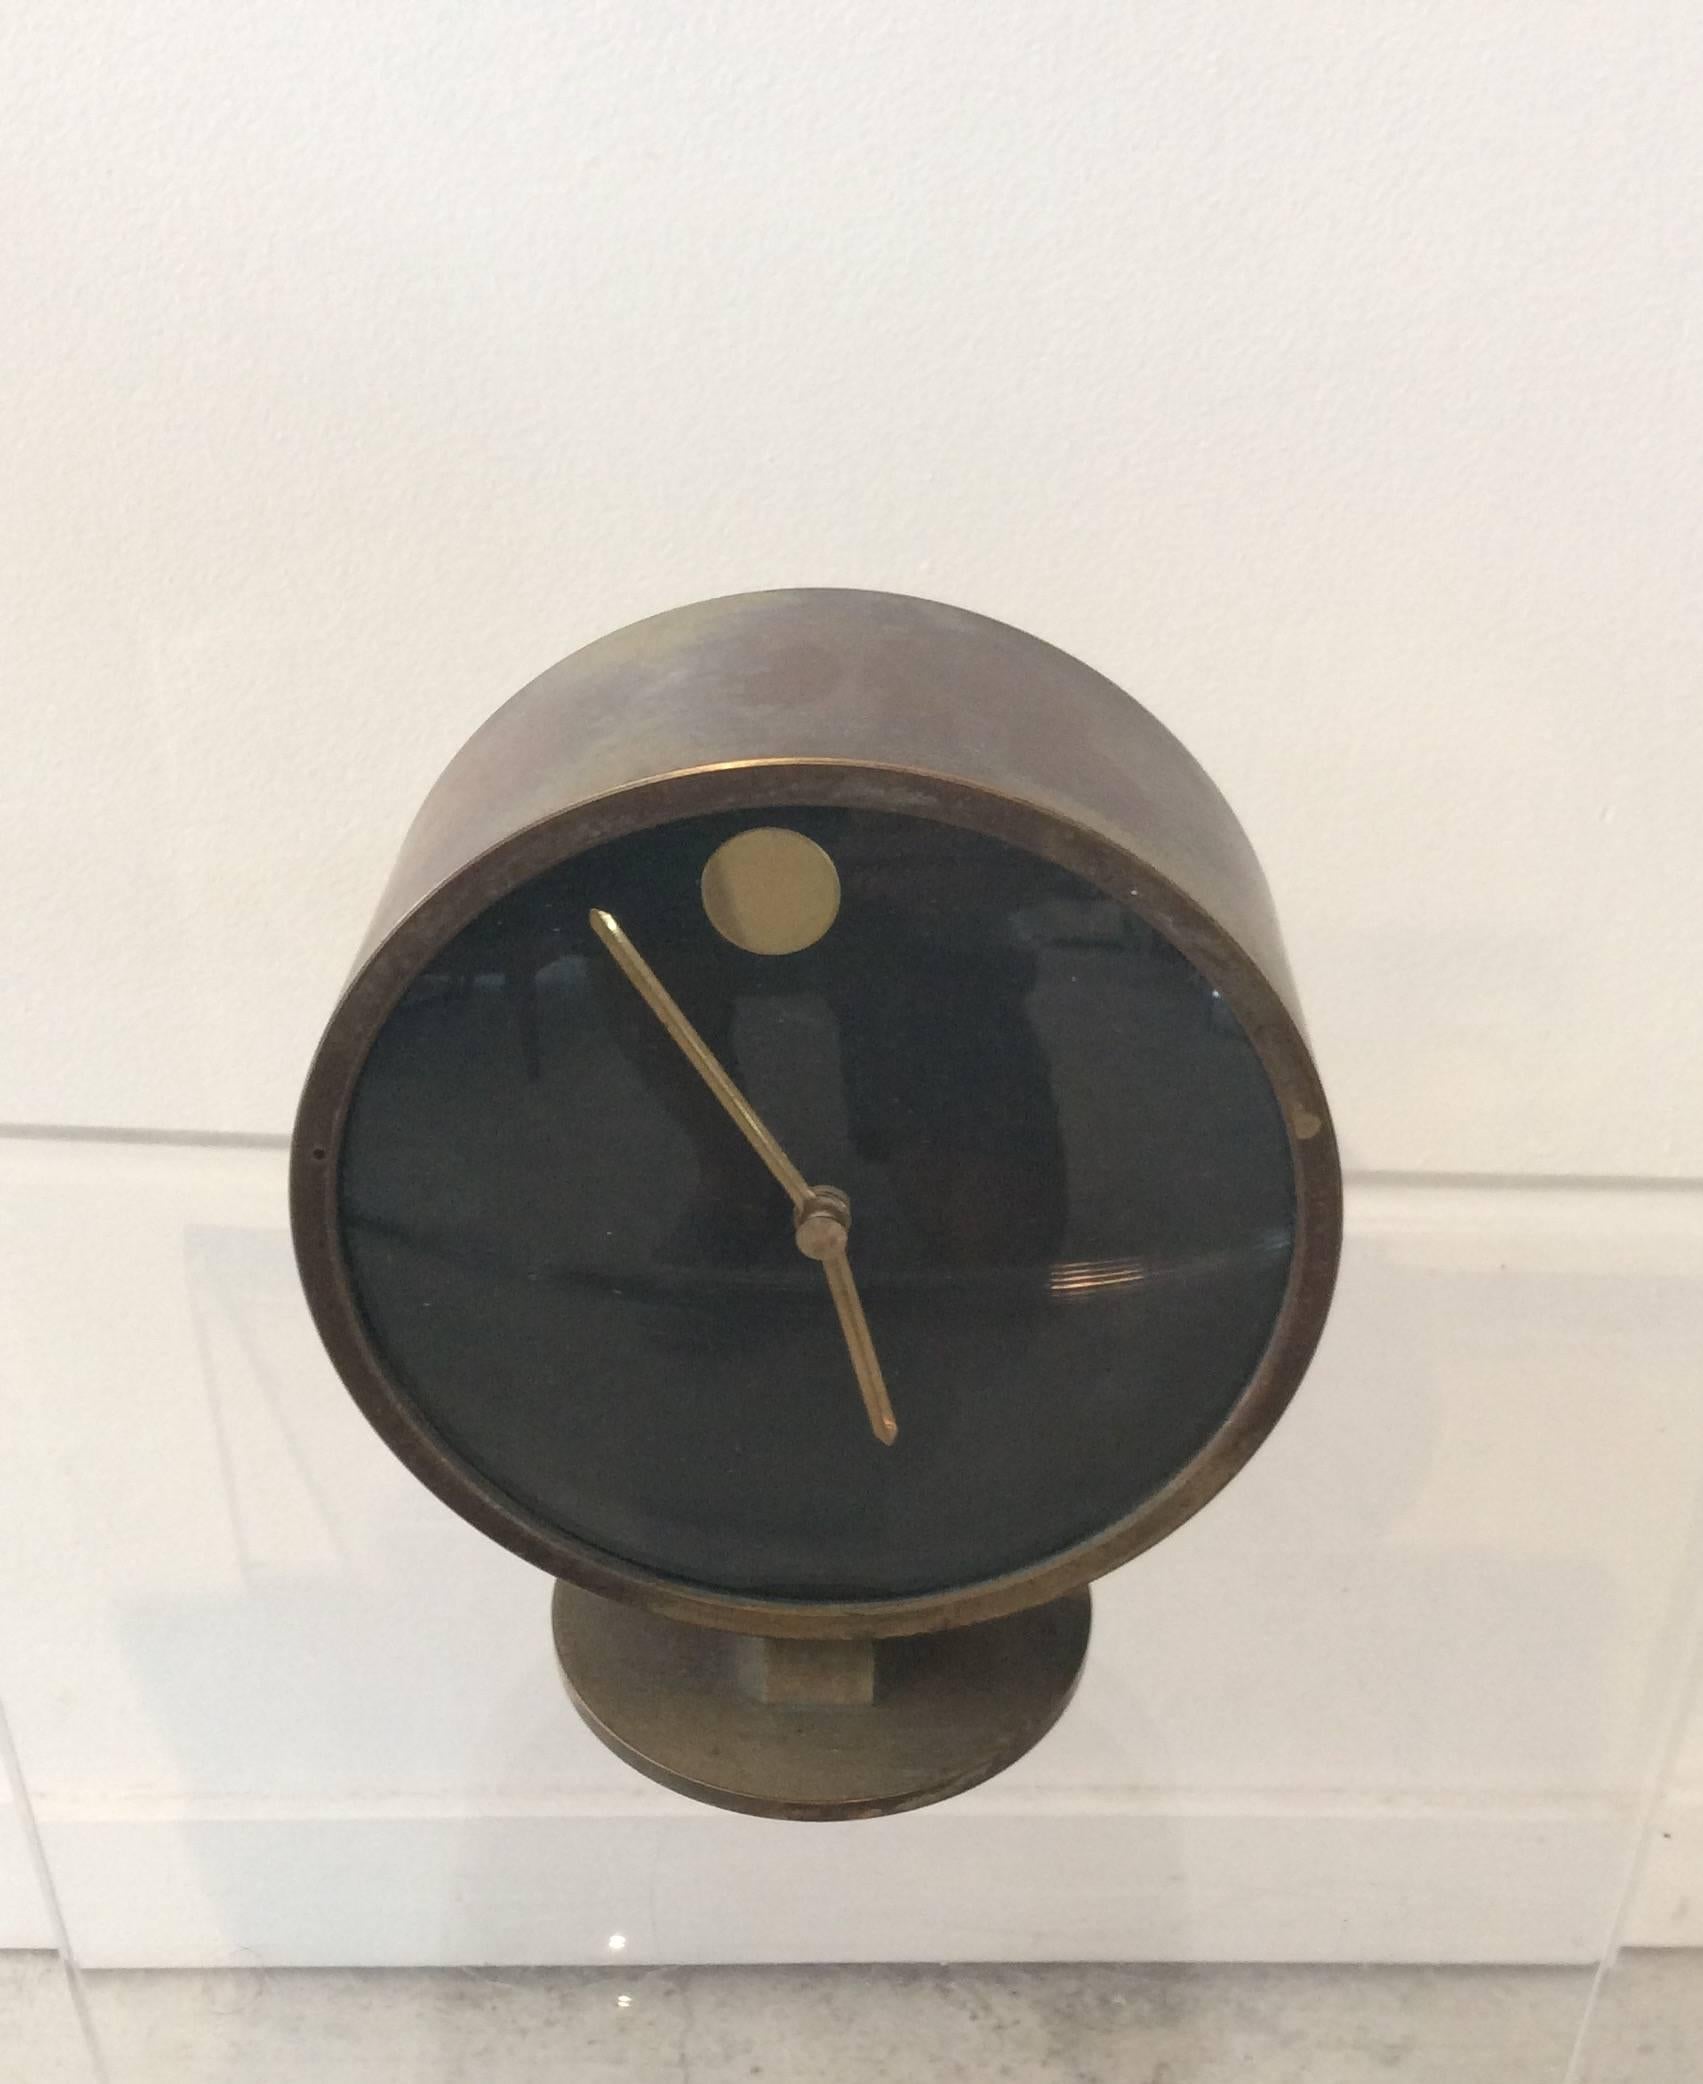 You are looking at a super chic brass table clock designed by Nathan George Horwitt for the Howard Miller clock company which made most of George Nelsons clocks. This clock in particular is known as the museum clock and is the table version.